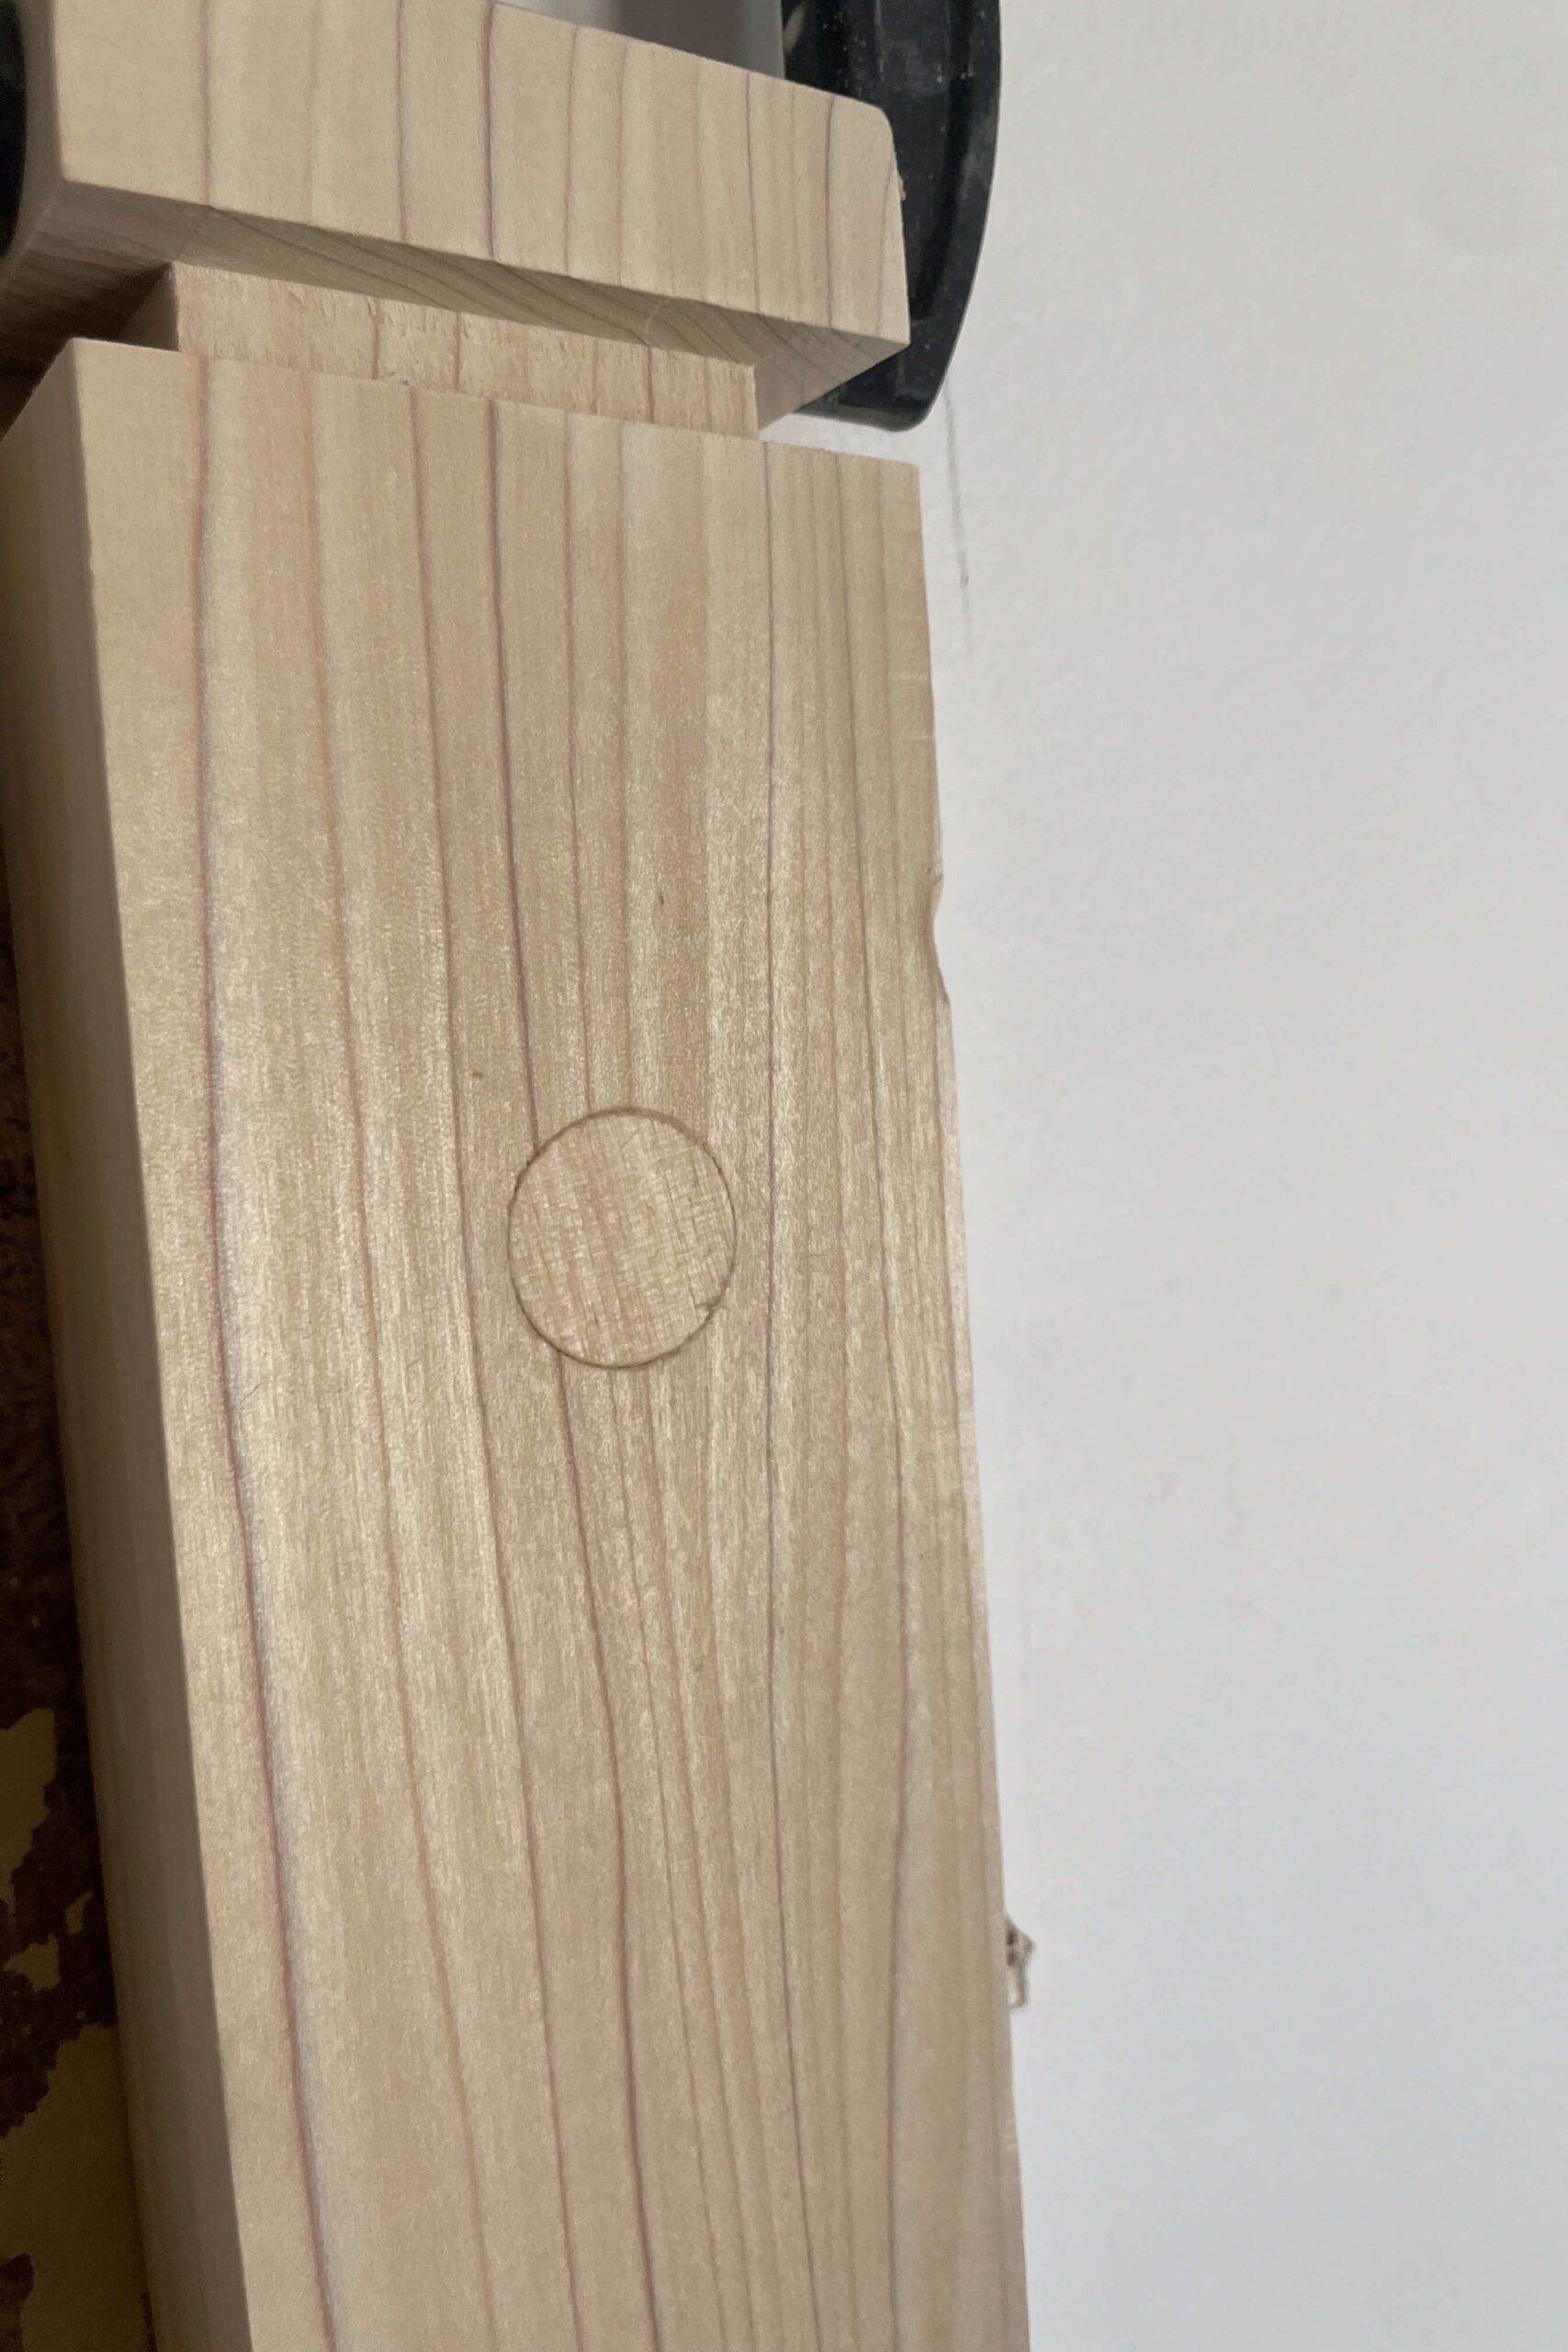 A plugged hole from installing a newel post against the wall. 